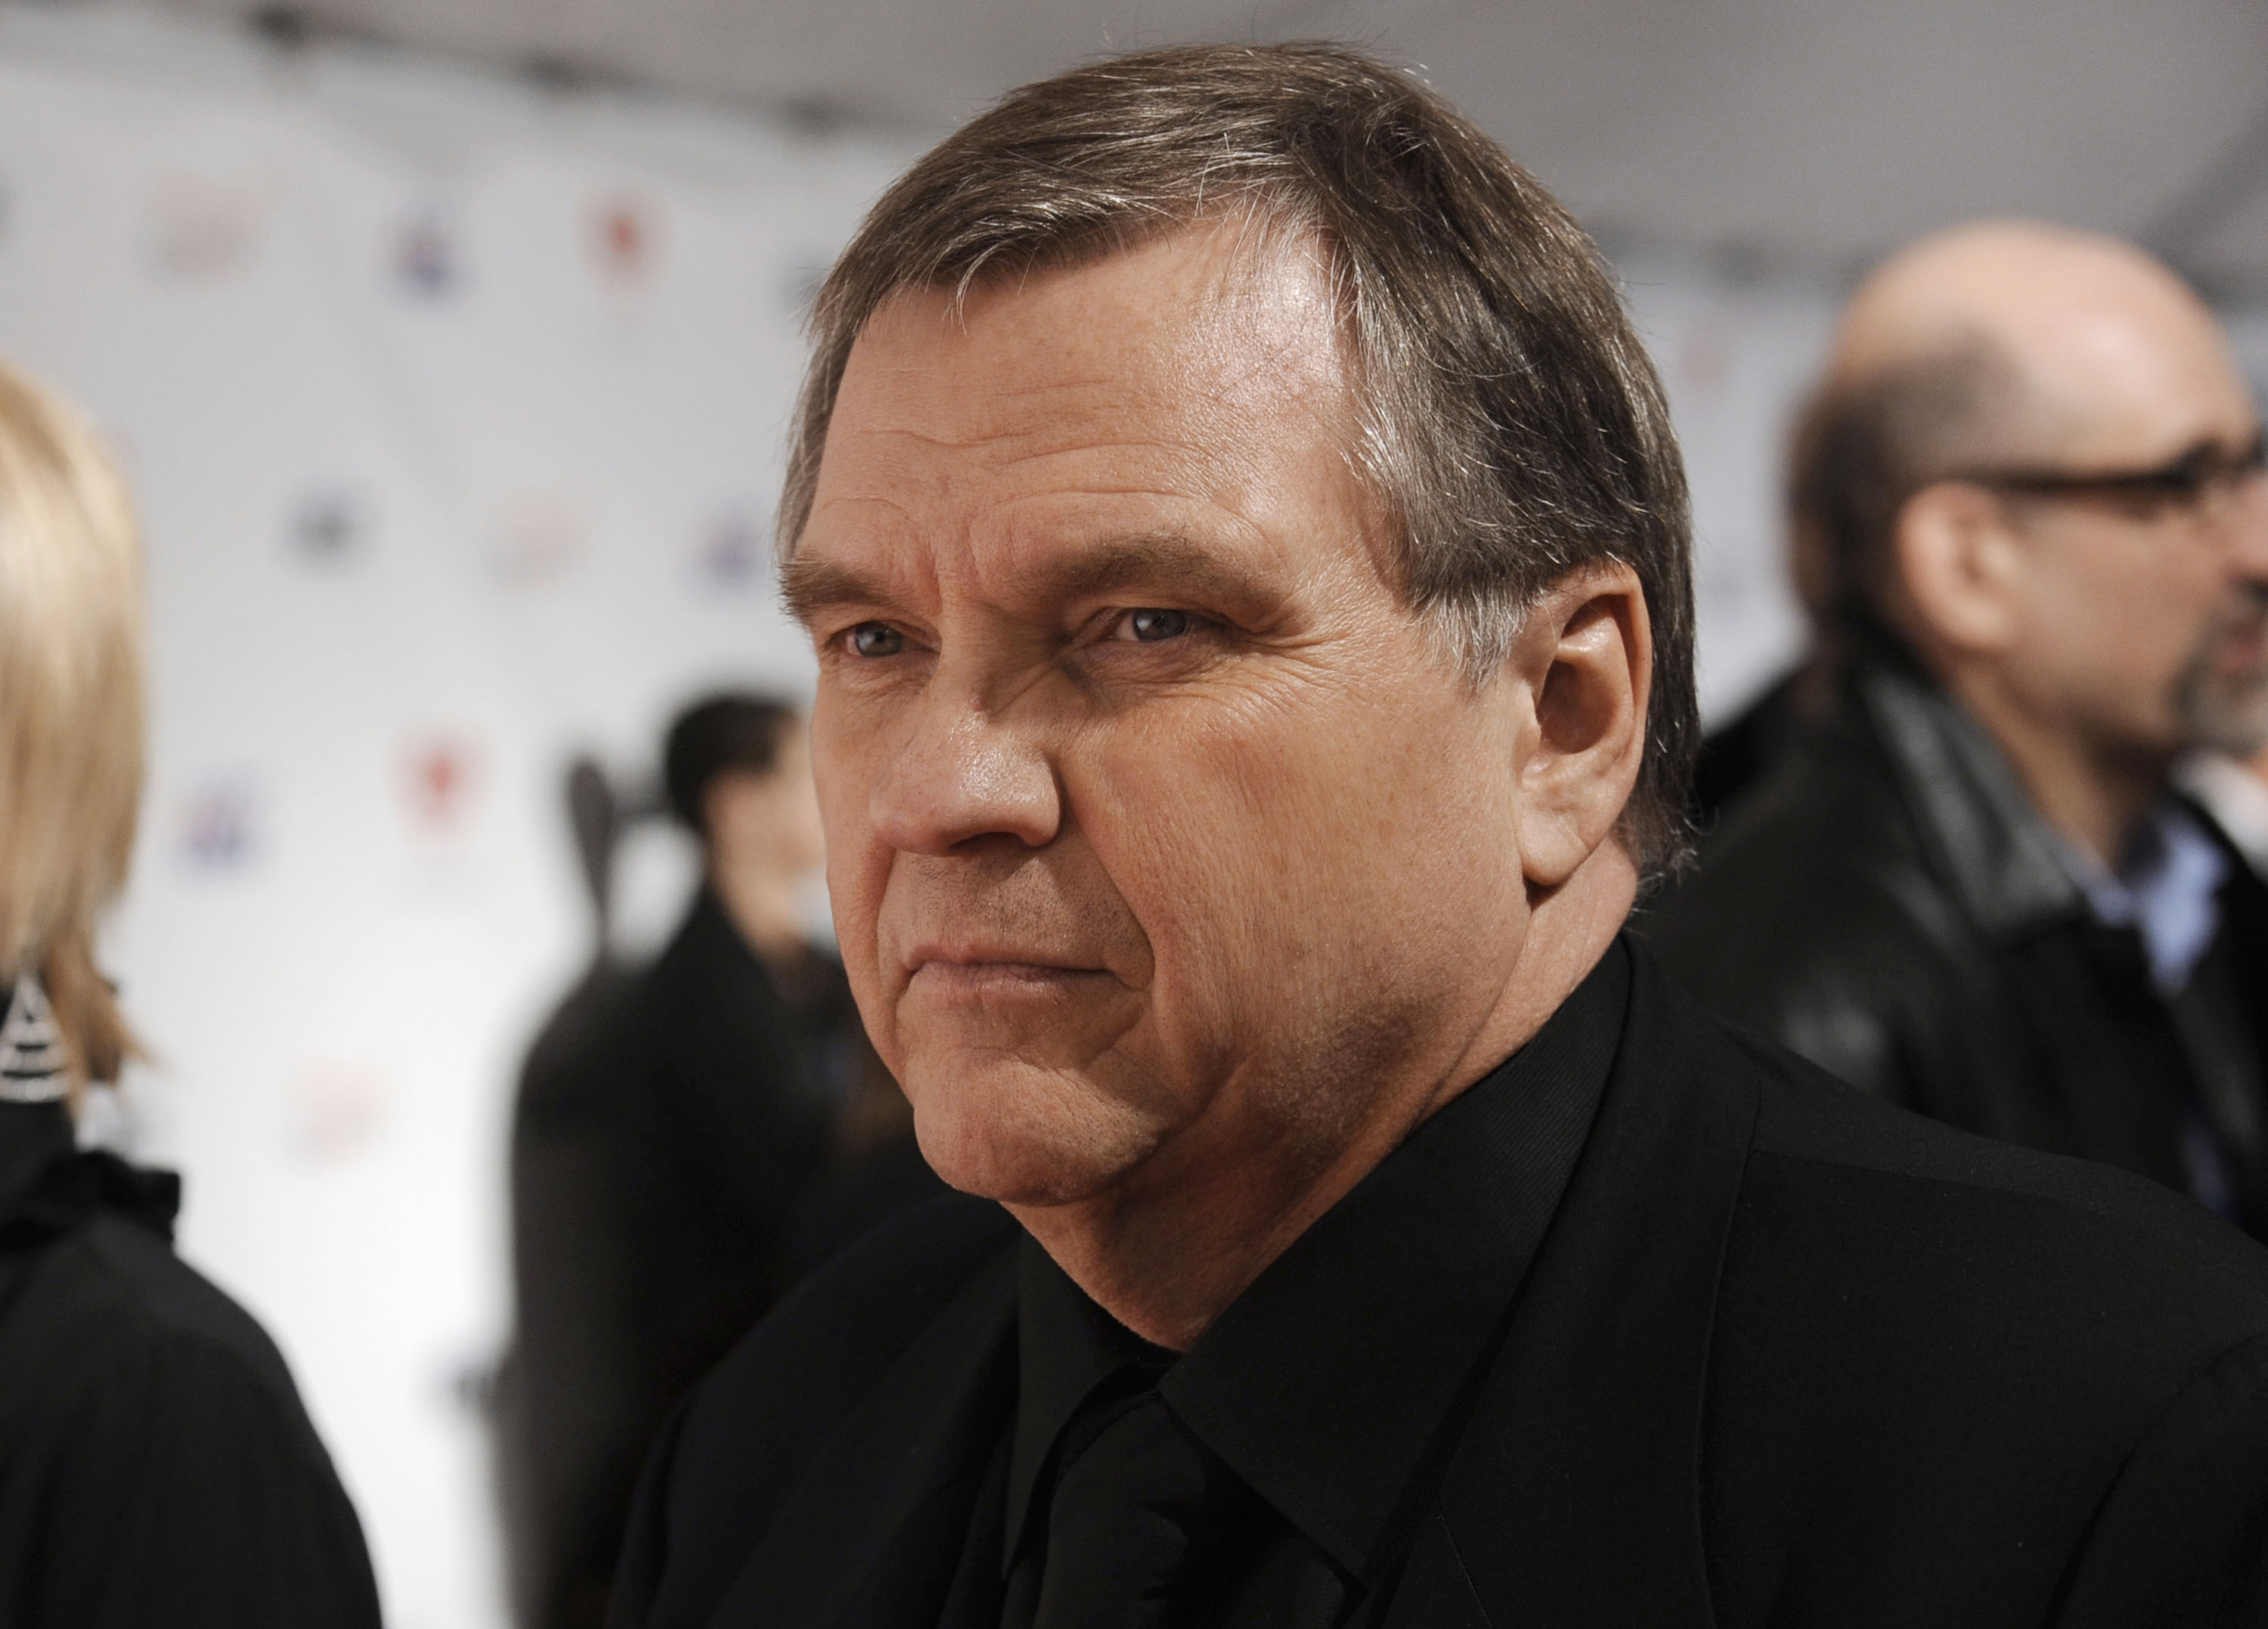 Singer and actor Meat Loaf dies at 74